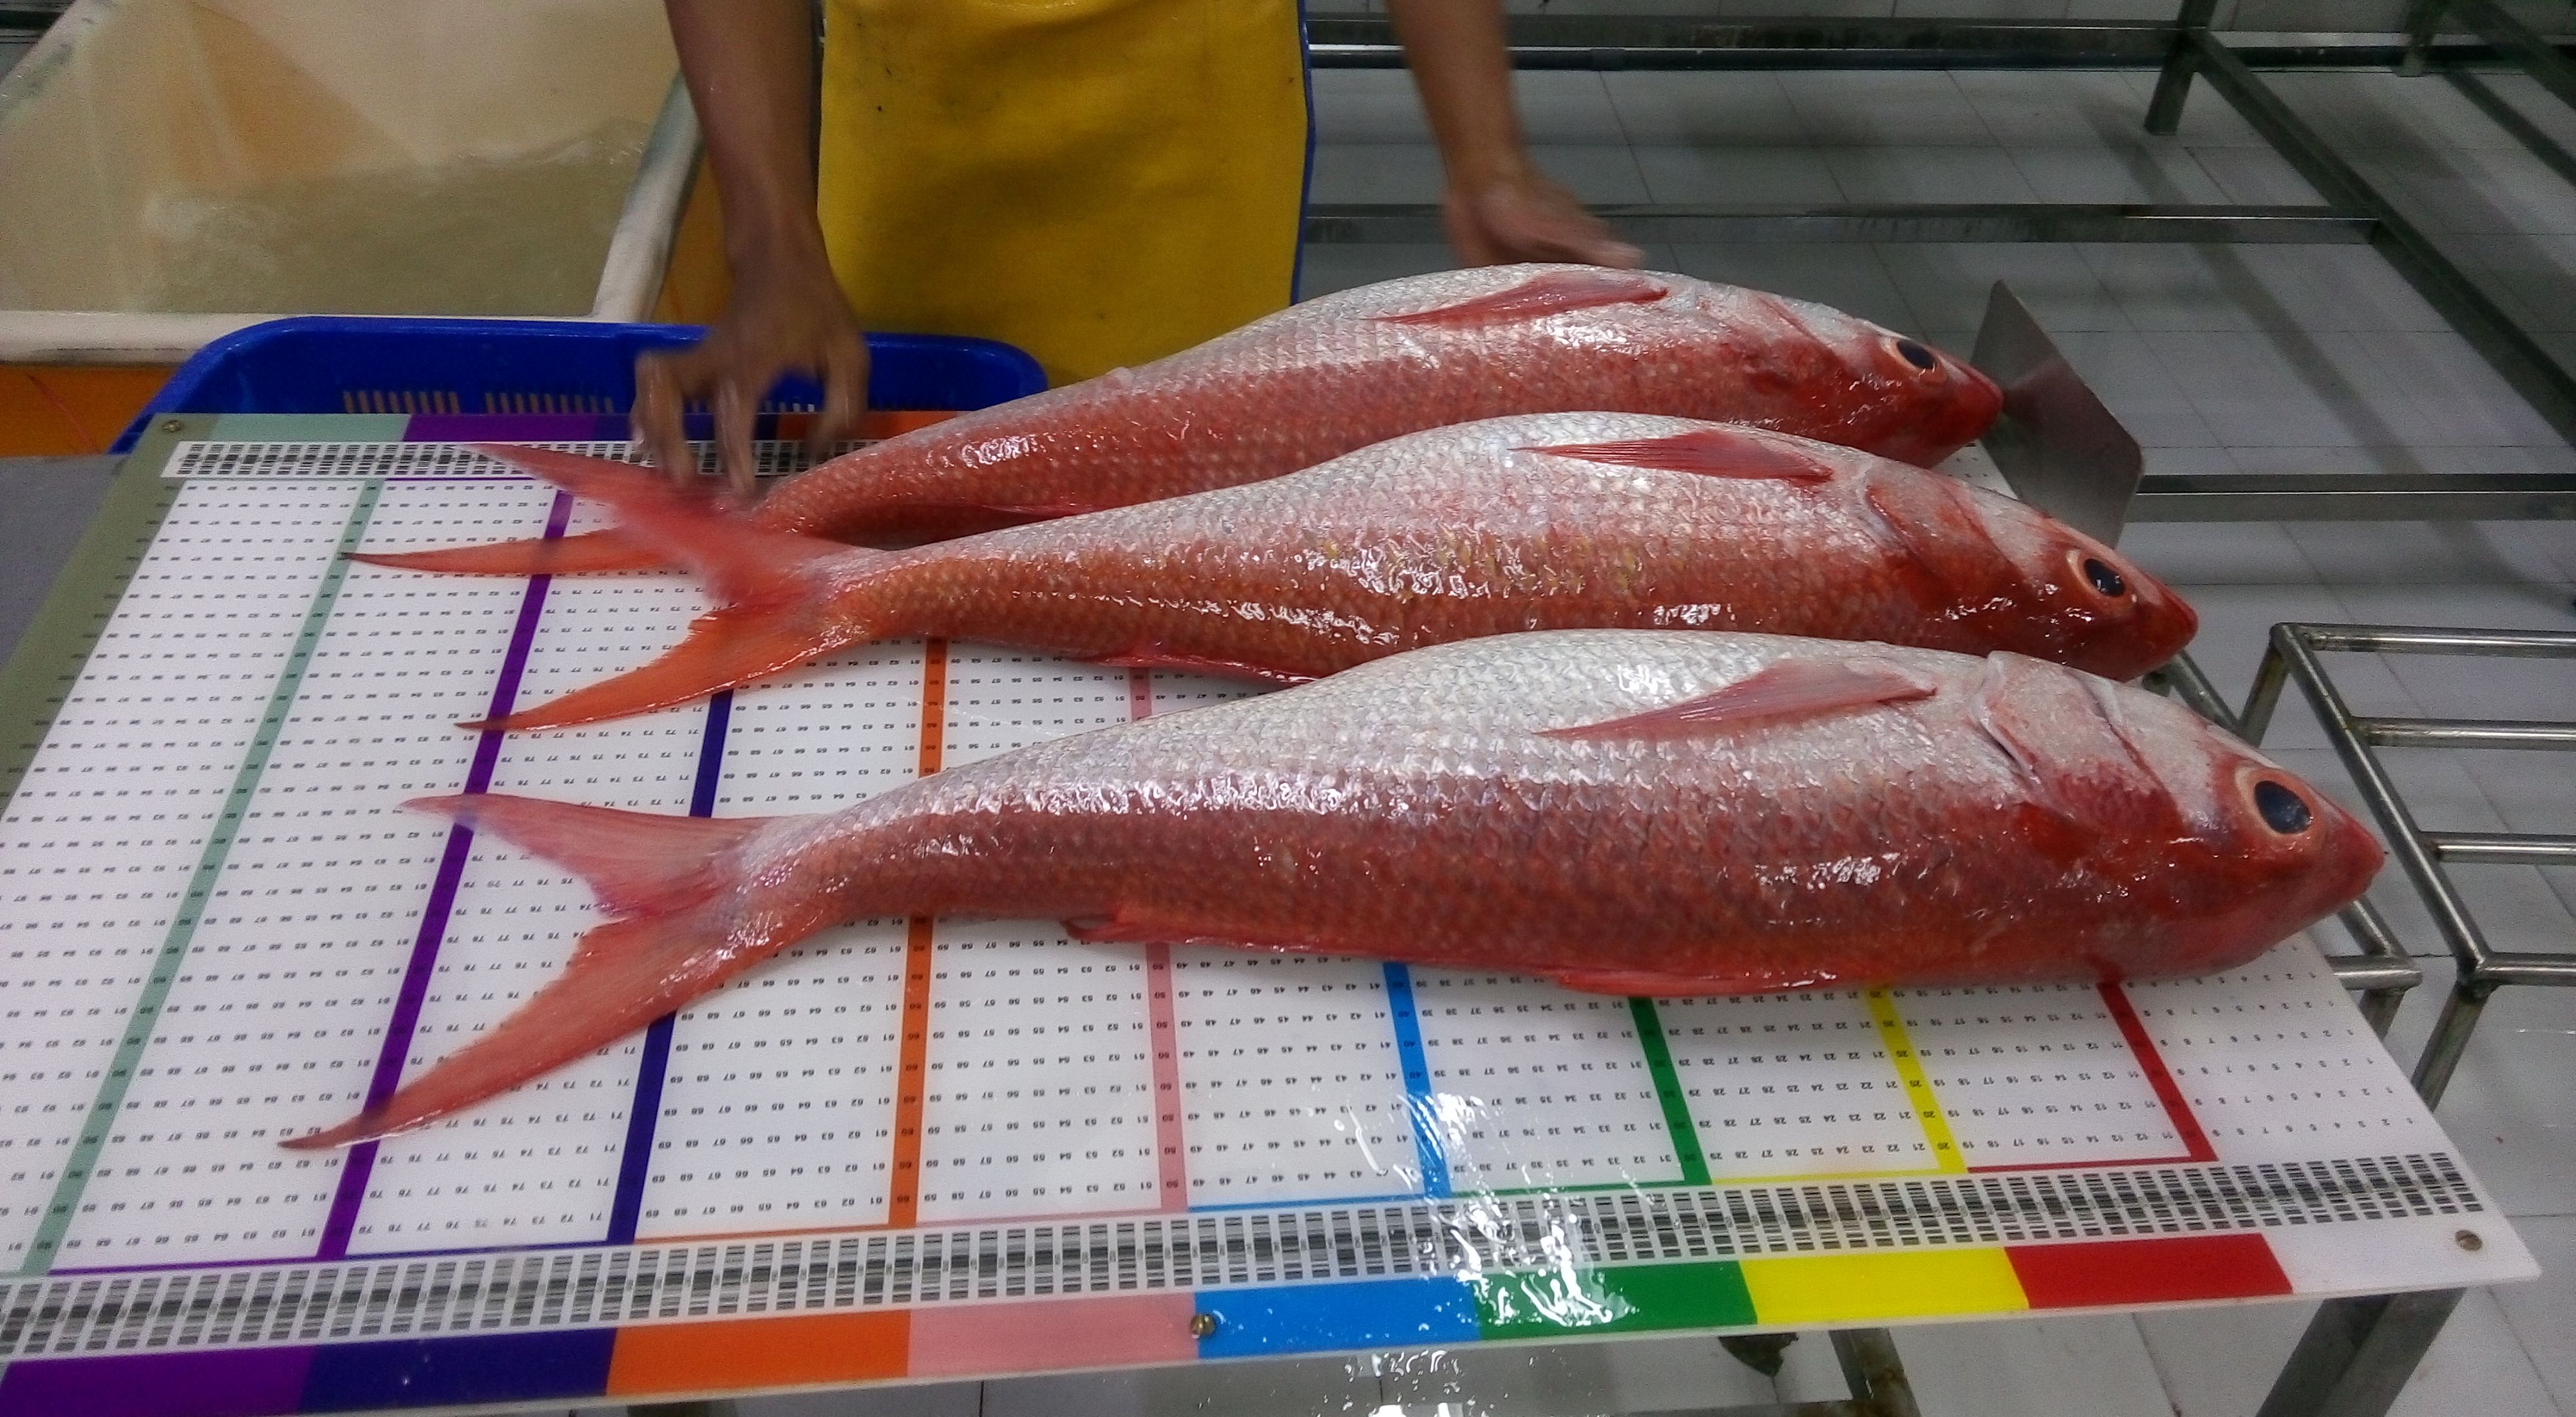 Three red fish are measured on a board.